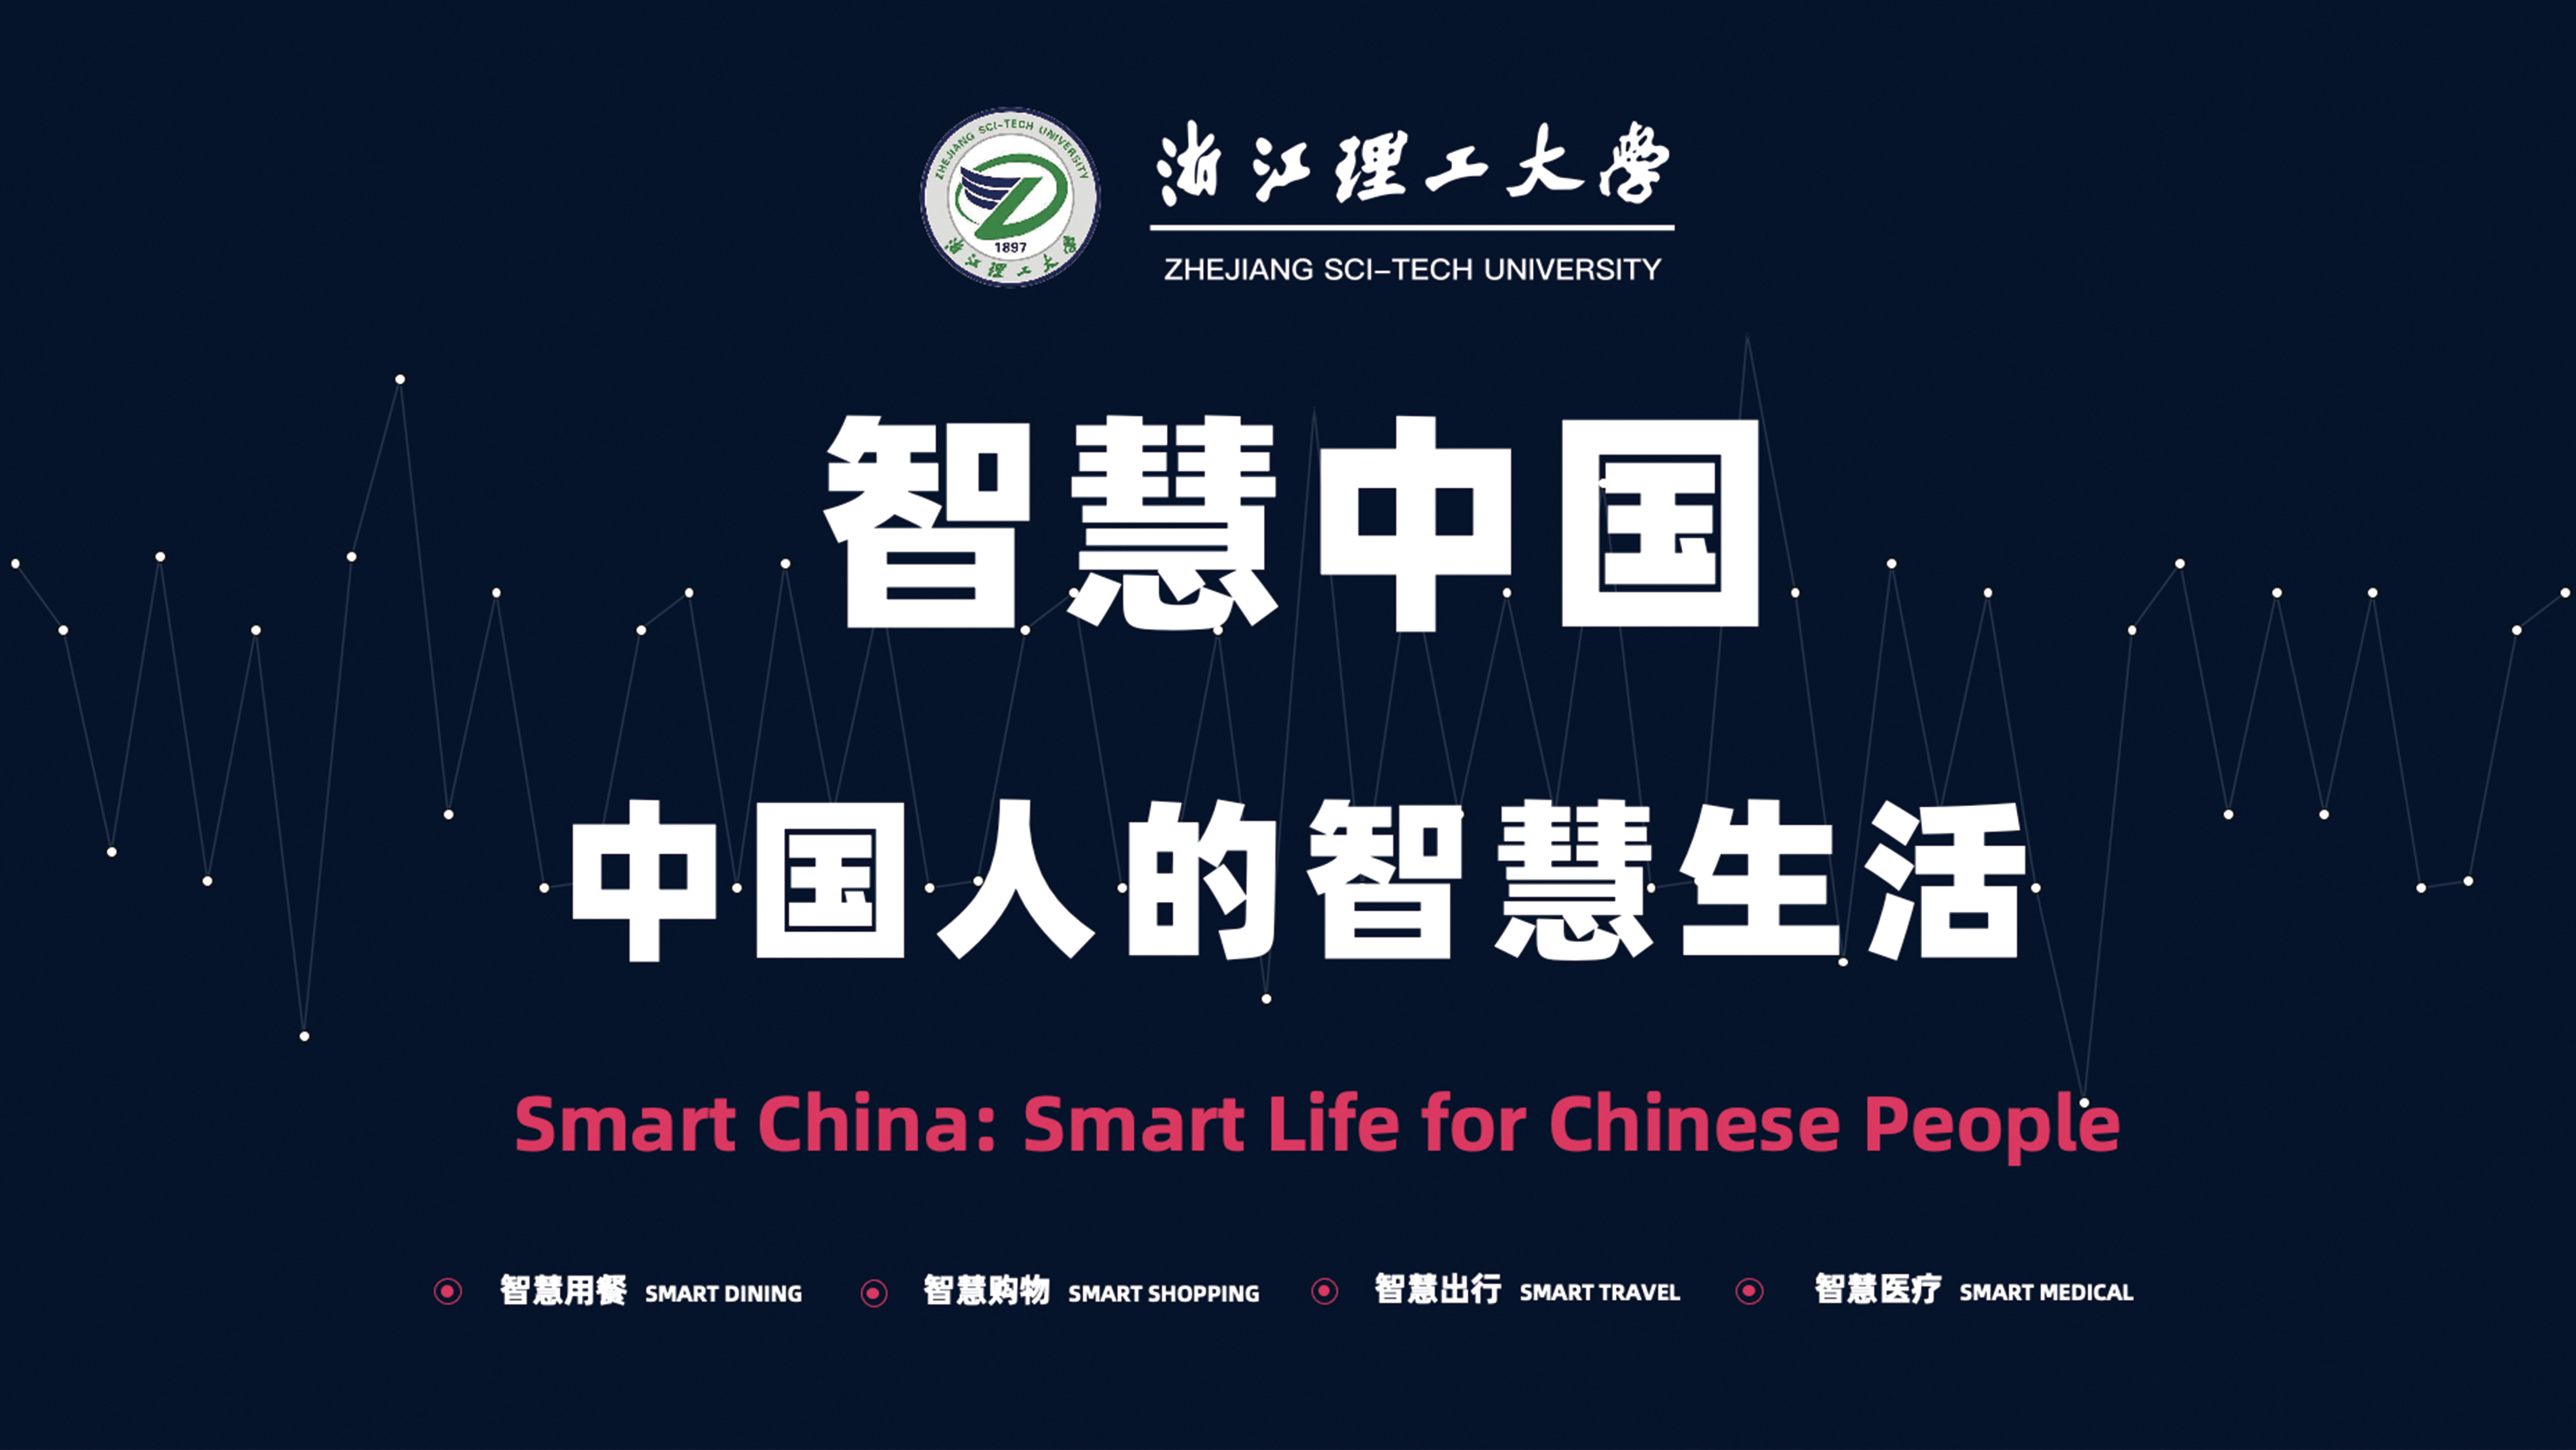 Smart China: Smart Life for Chinese People